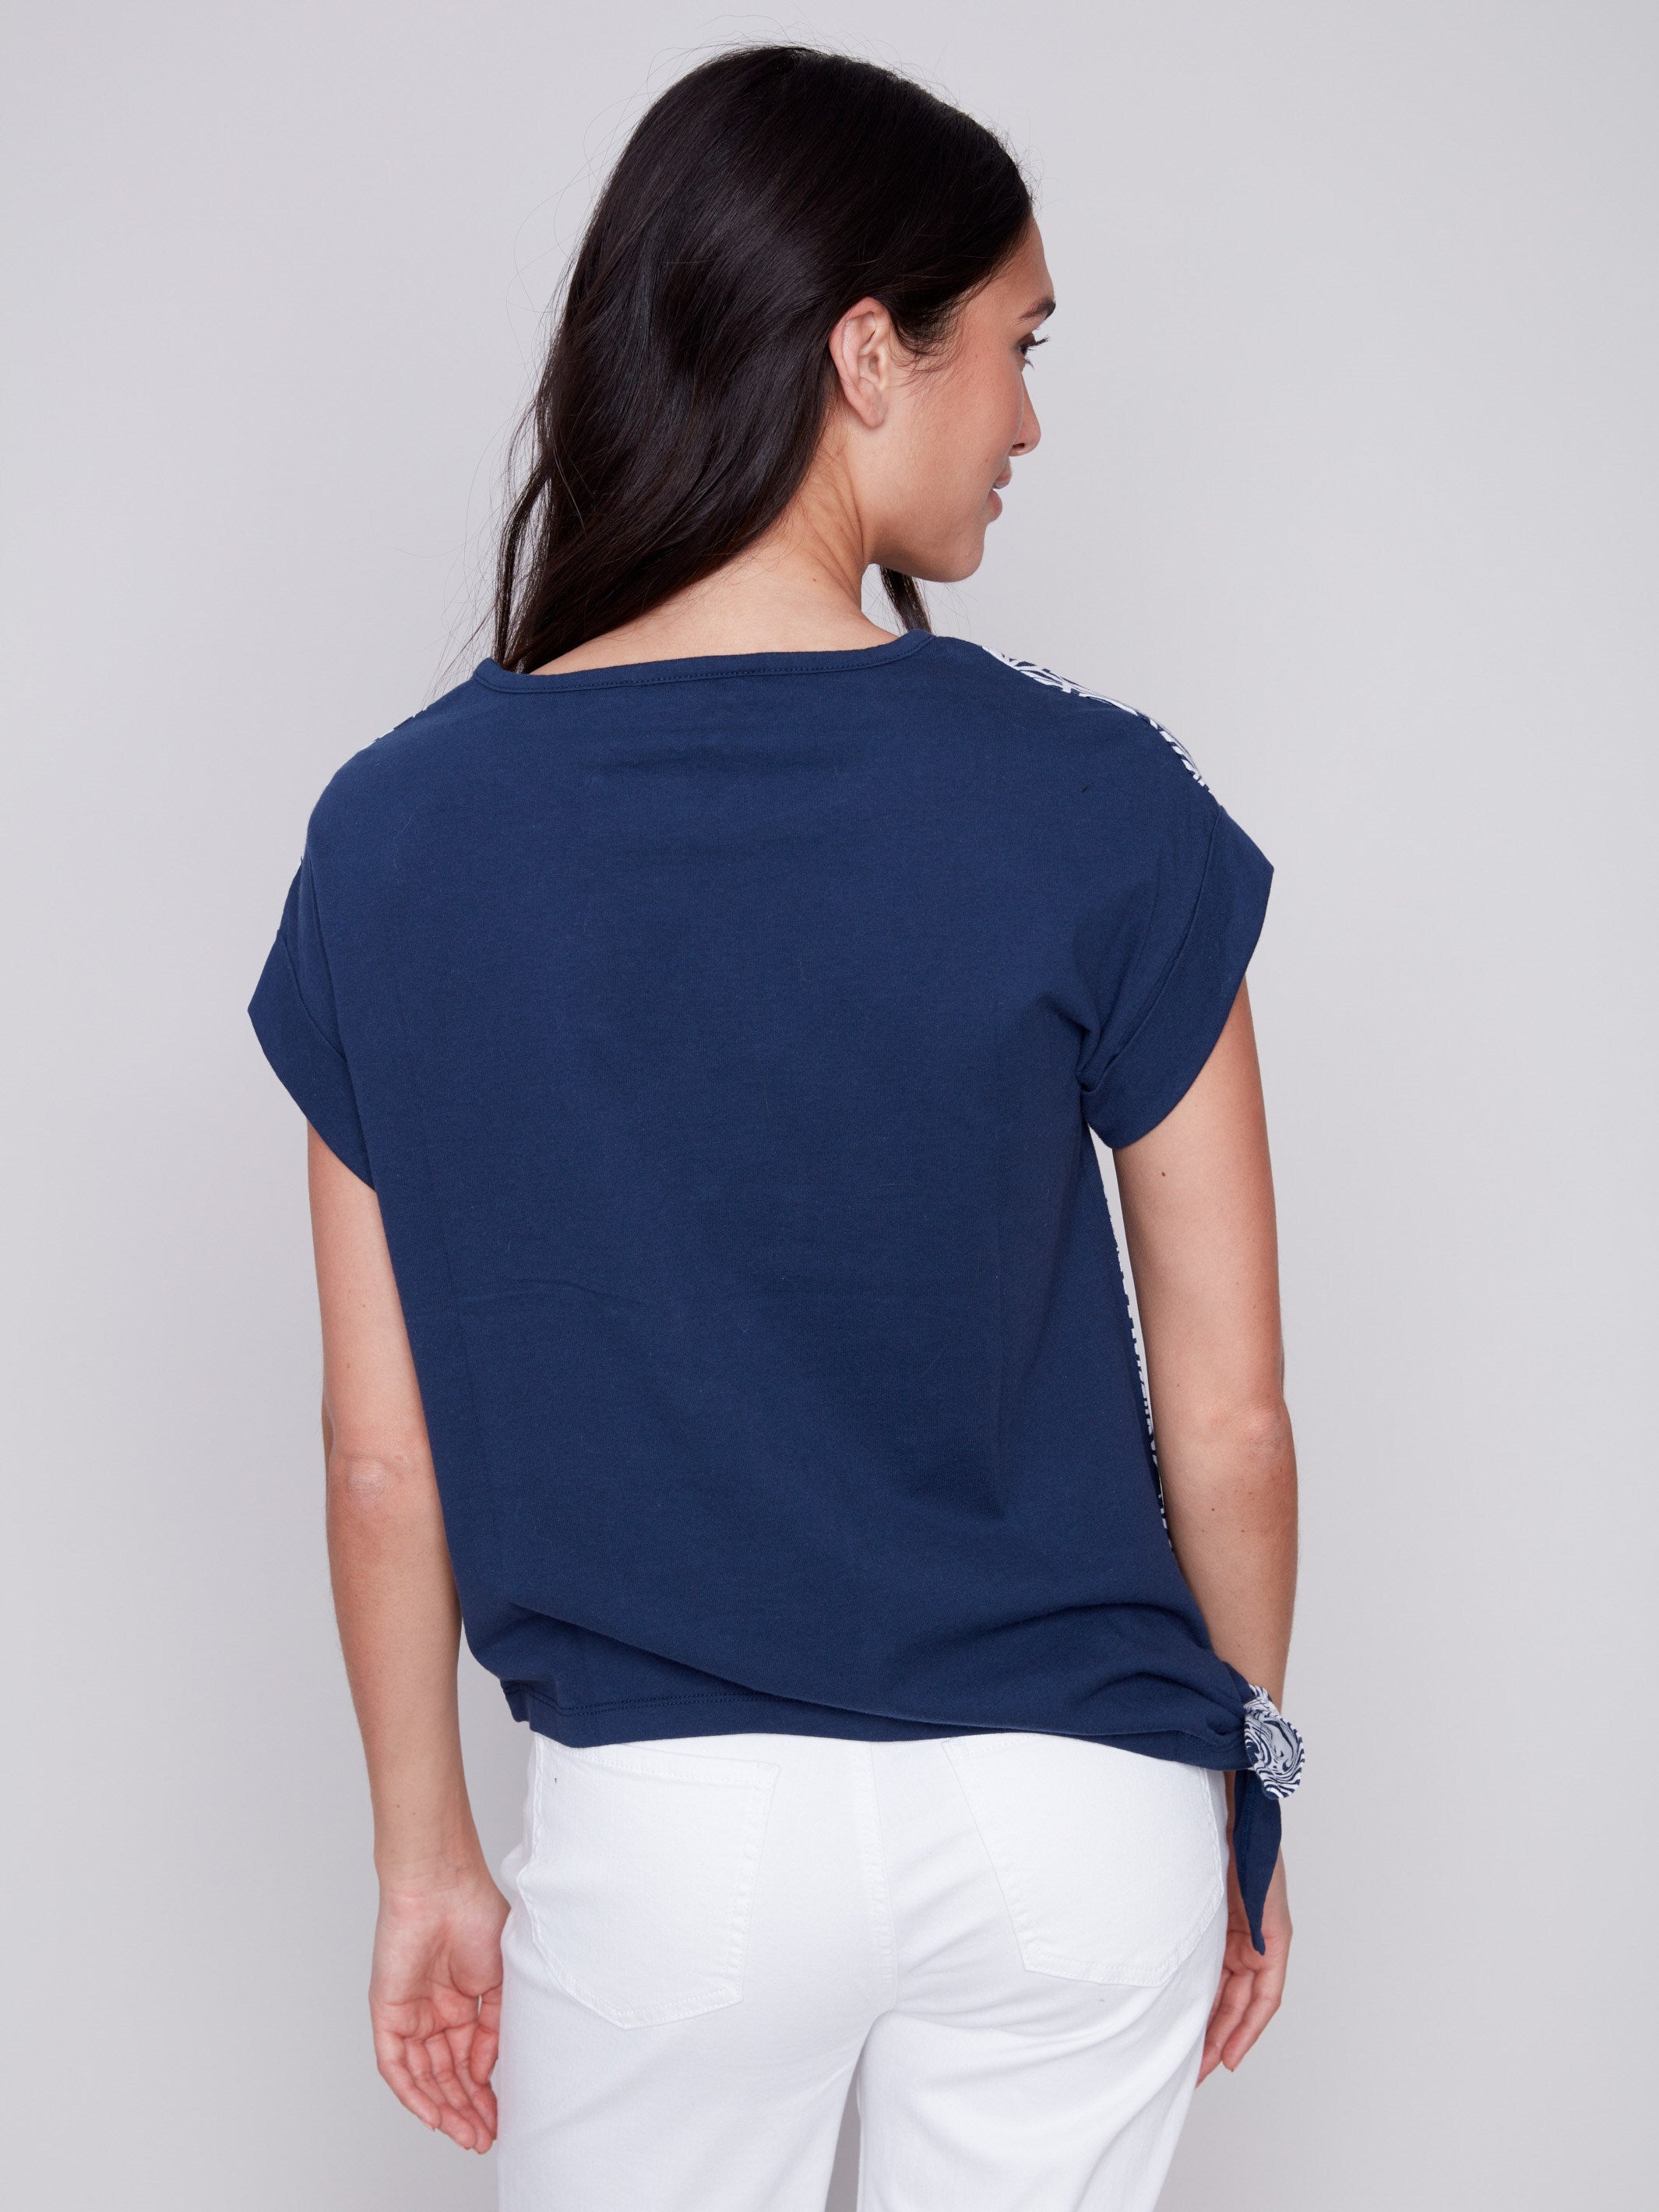 Printed Linen Top with Side Tie - Navy - Charlie B Collection Canada - Image 5